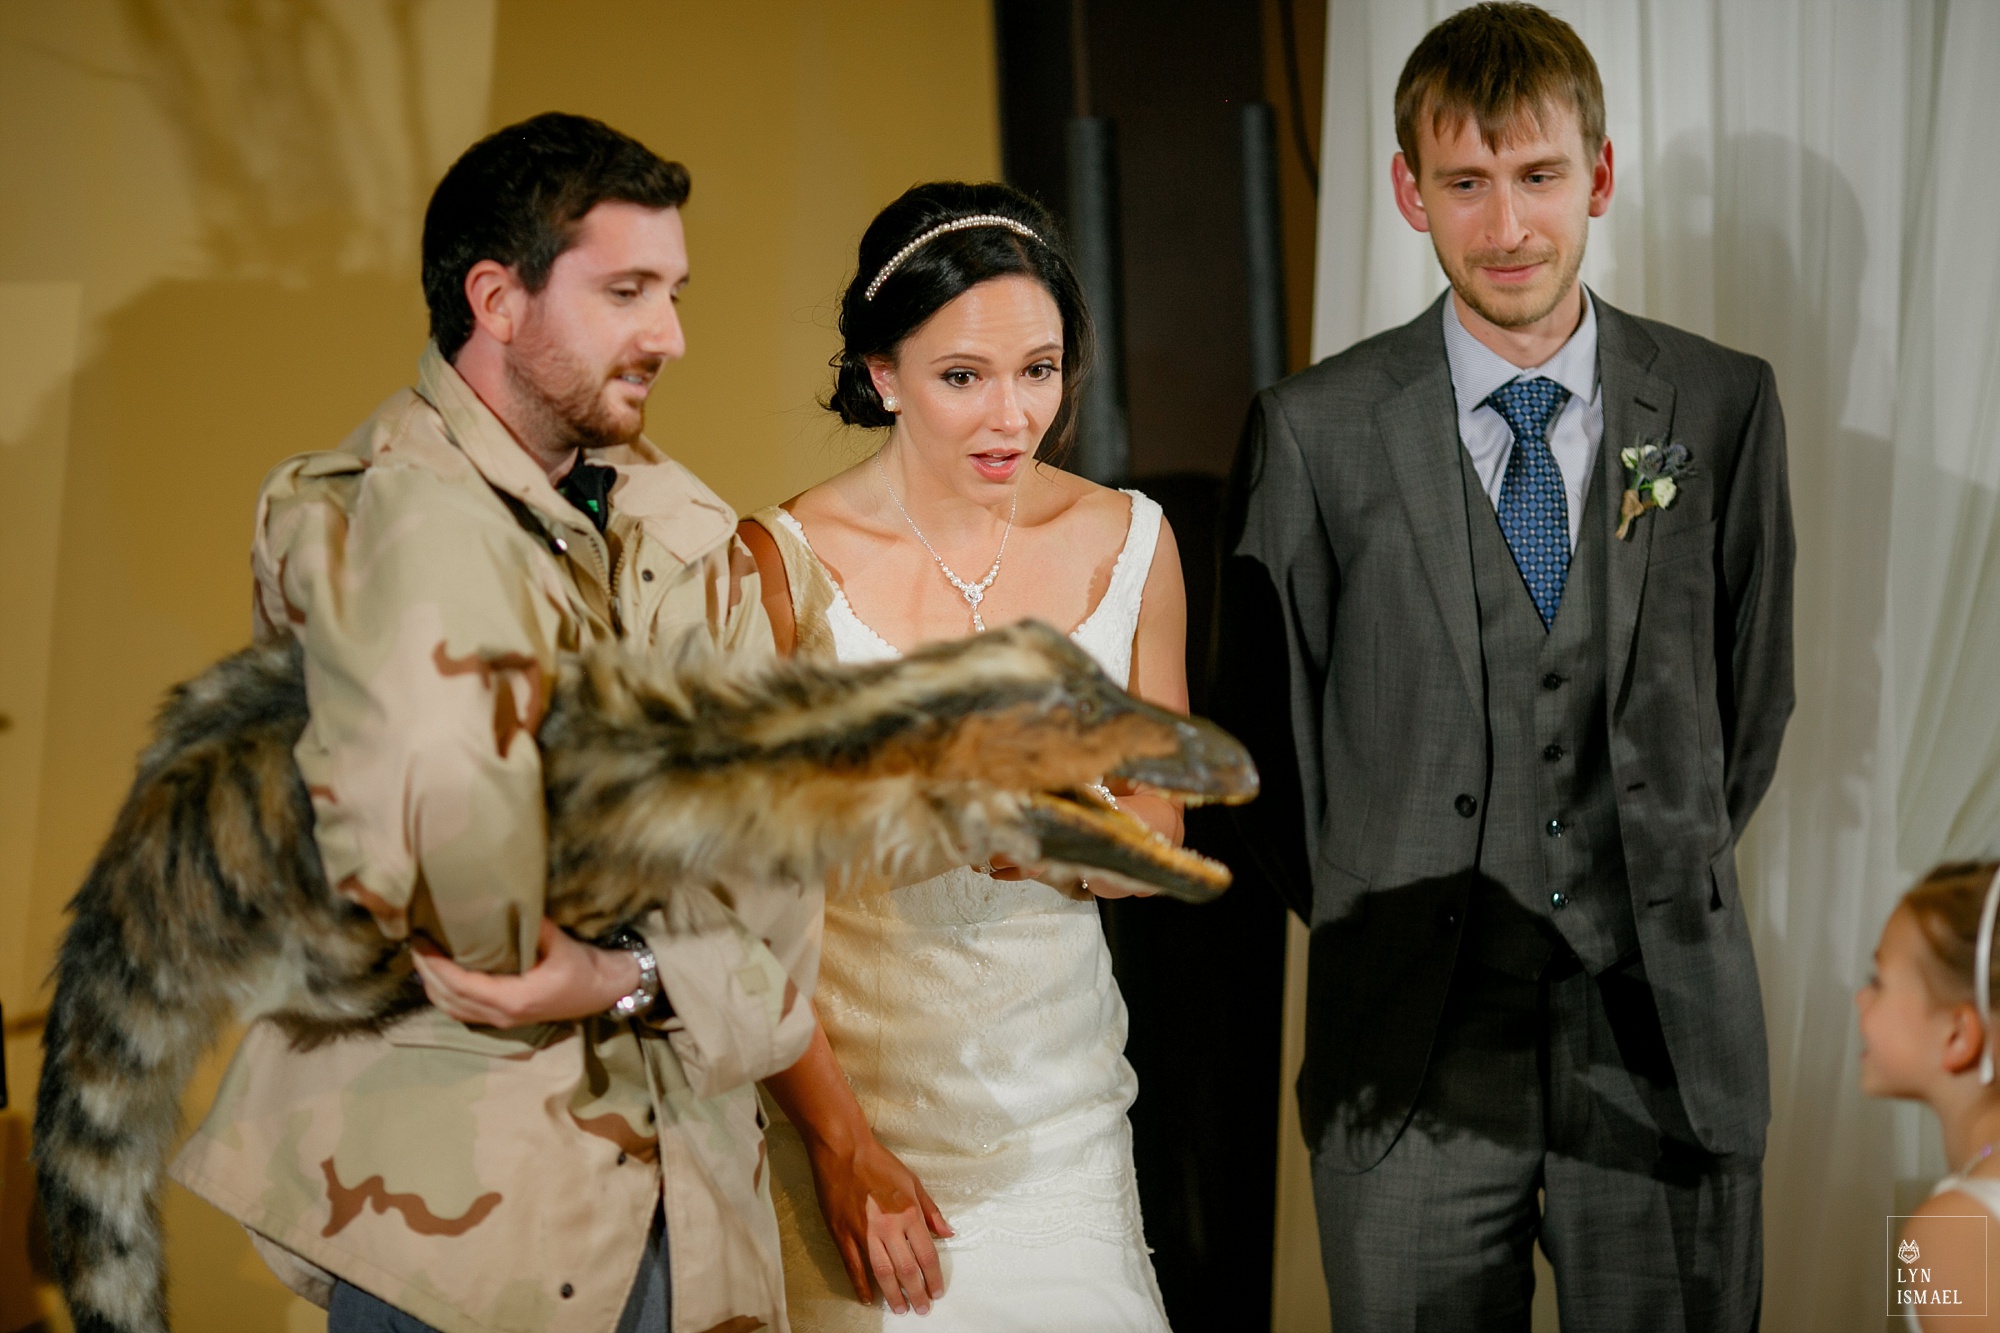 Dinosaur puppet made an appearance a wedding reception at THEMUSEUM